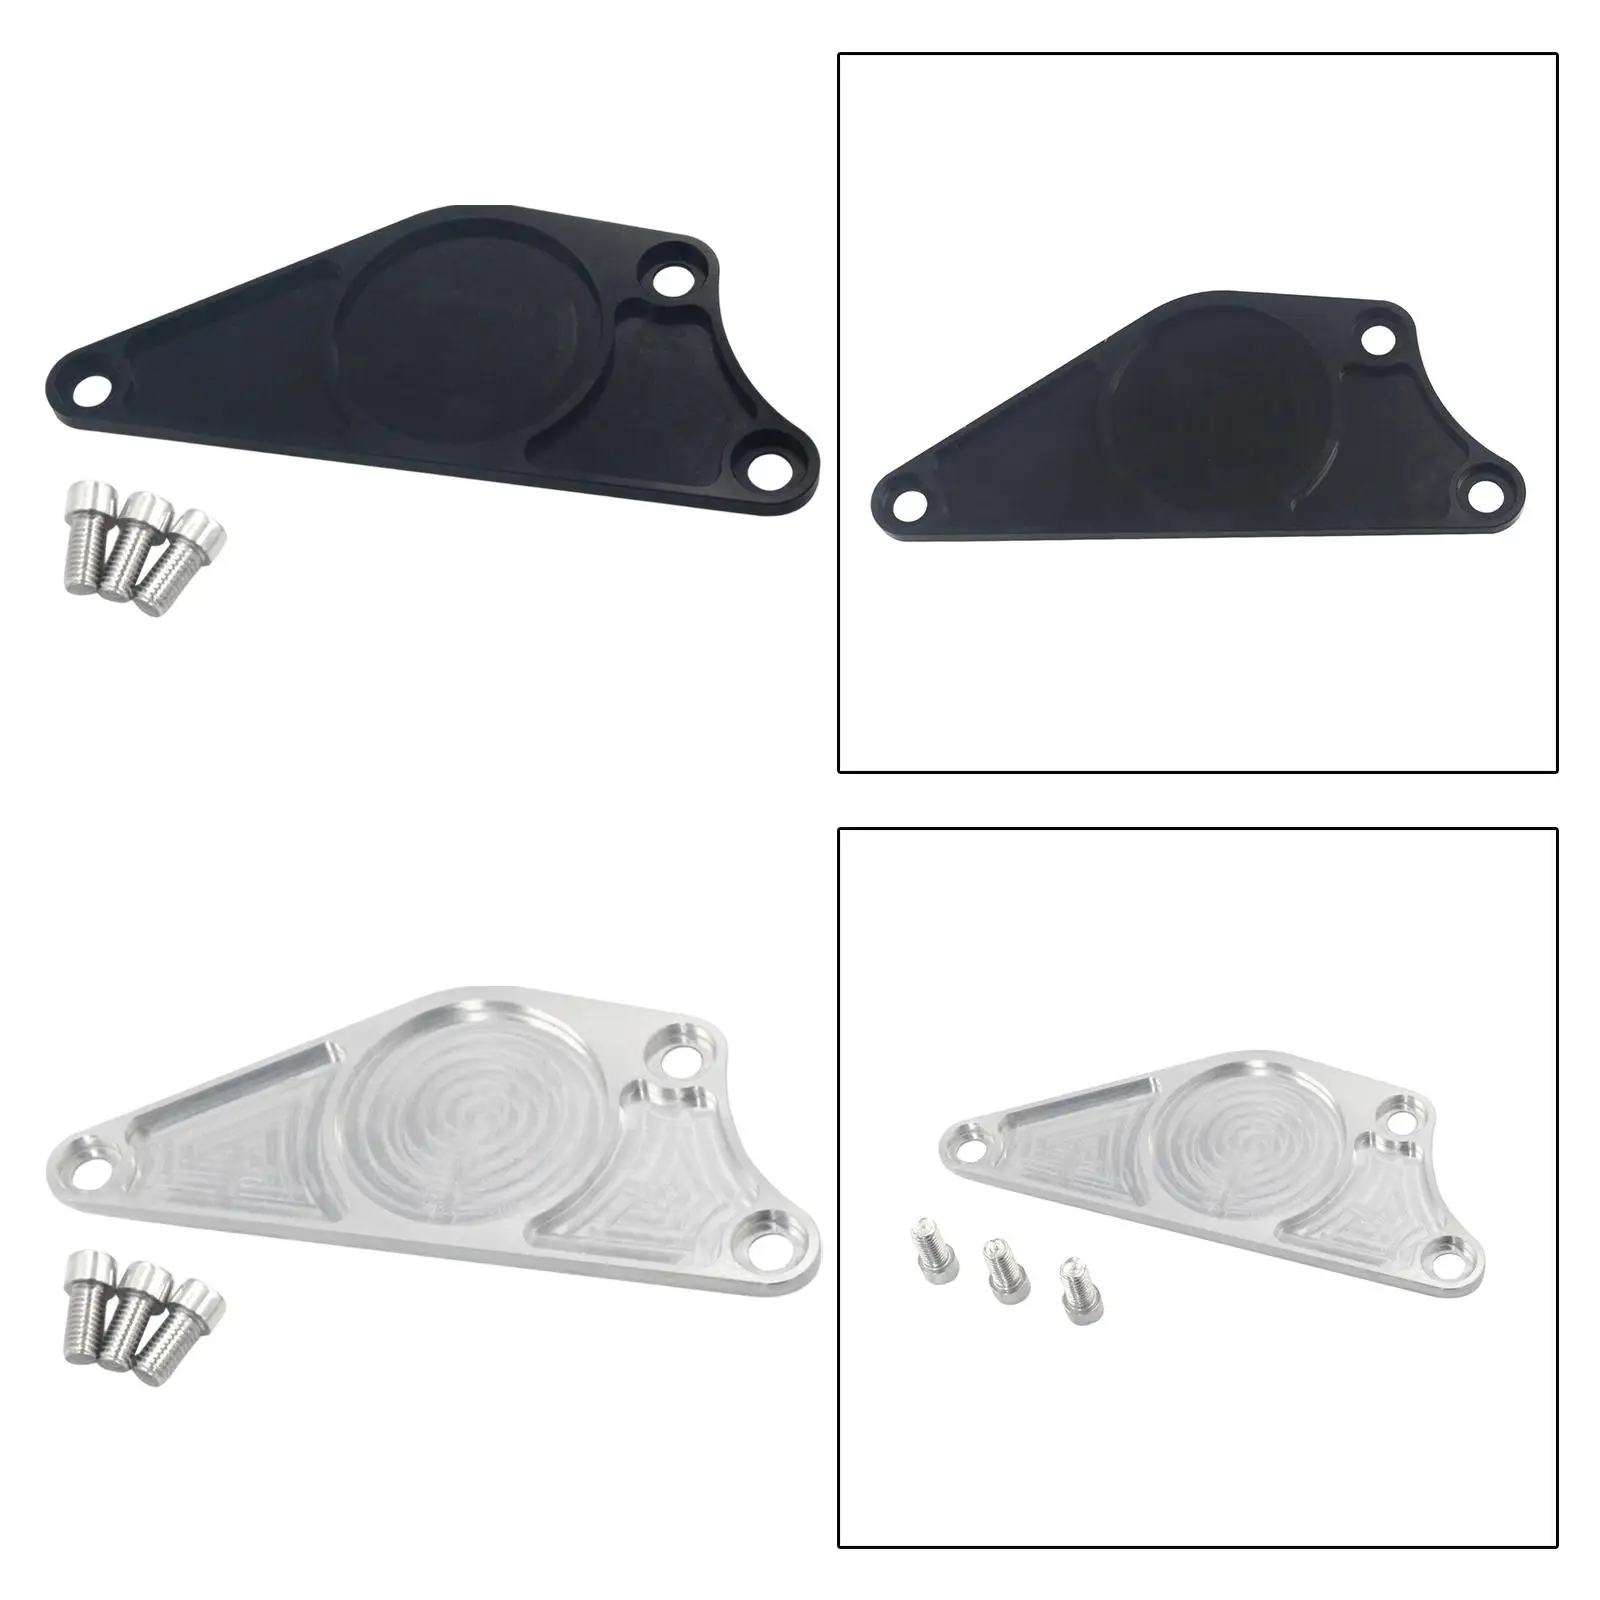 Billet cam Plate Accessories Easy Installation Replacement Fits Adapter for Scion FRS 2013+ Aluminum Alloy Camshaft Plate